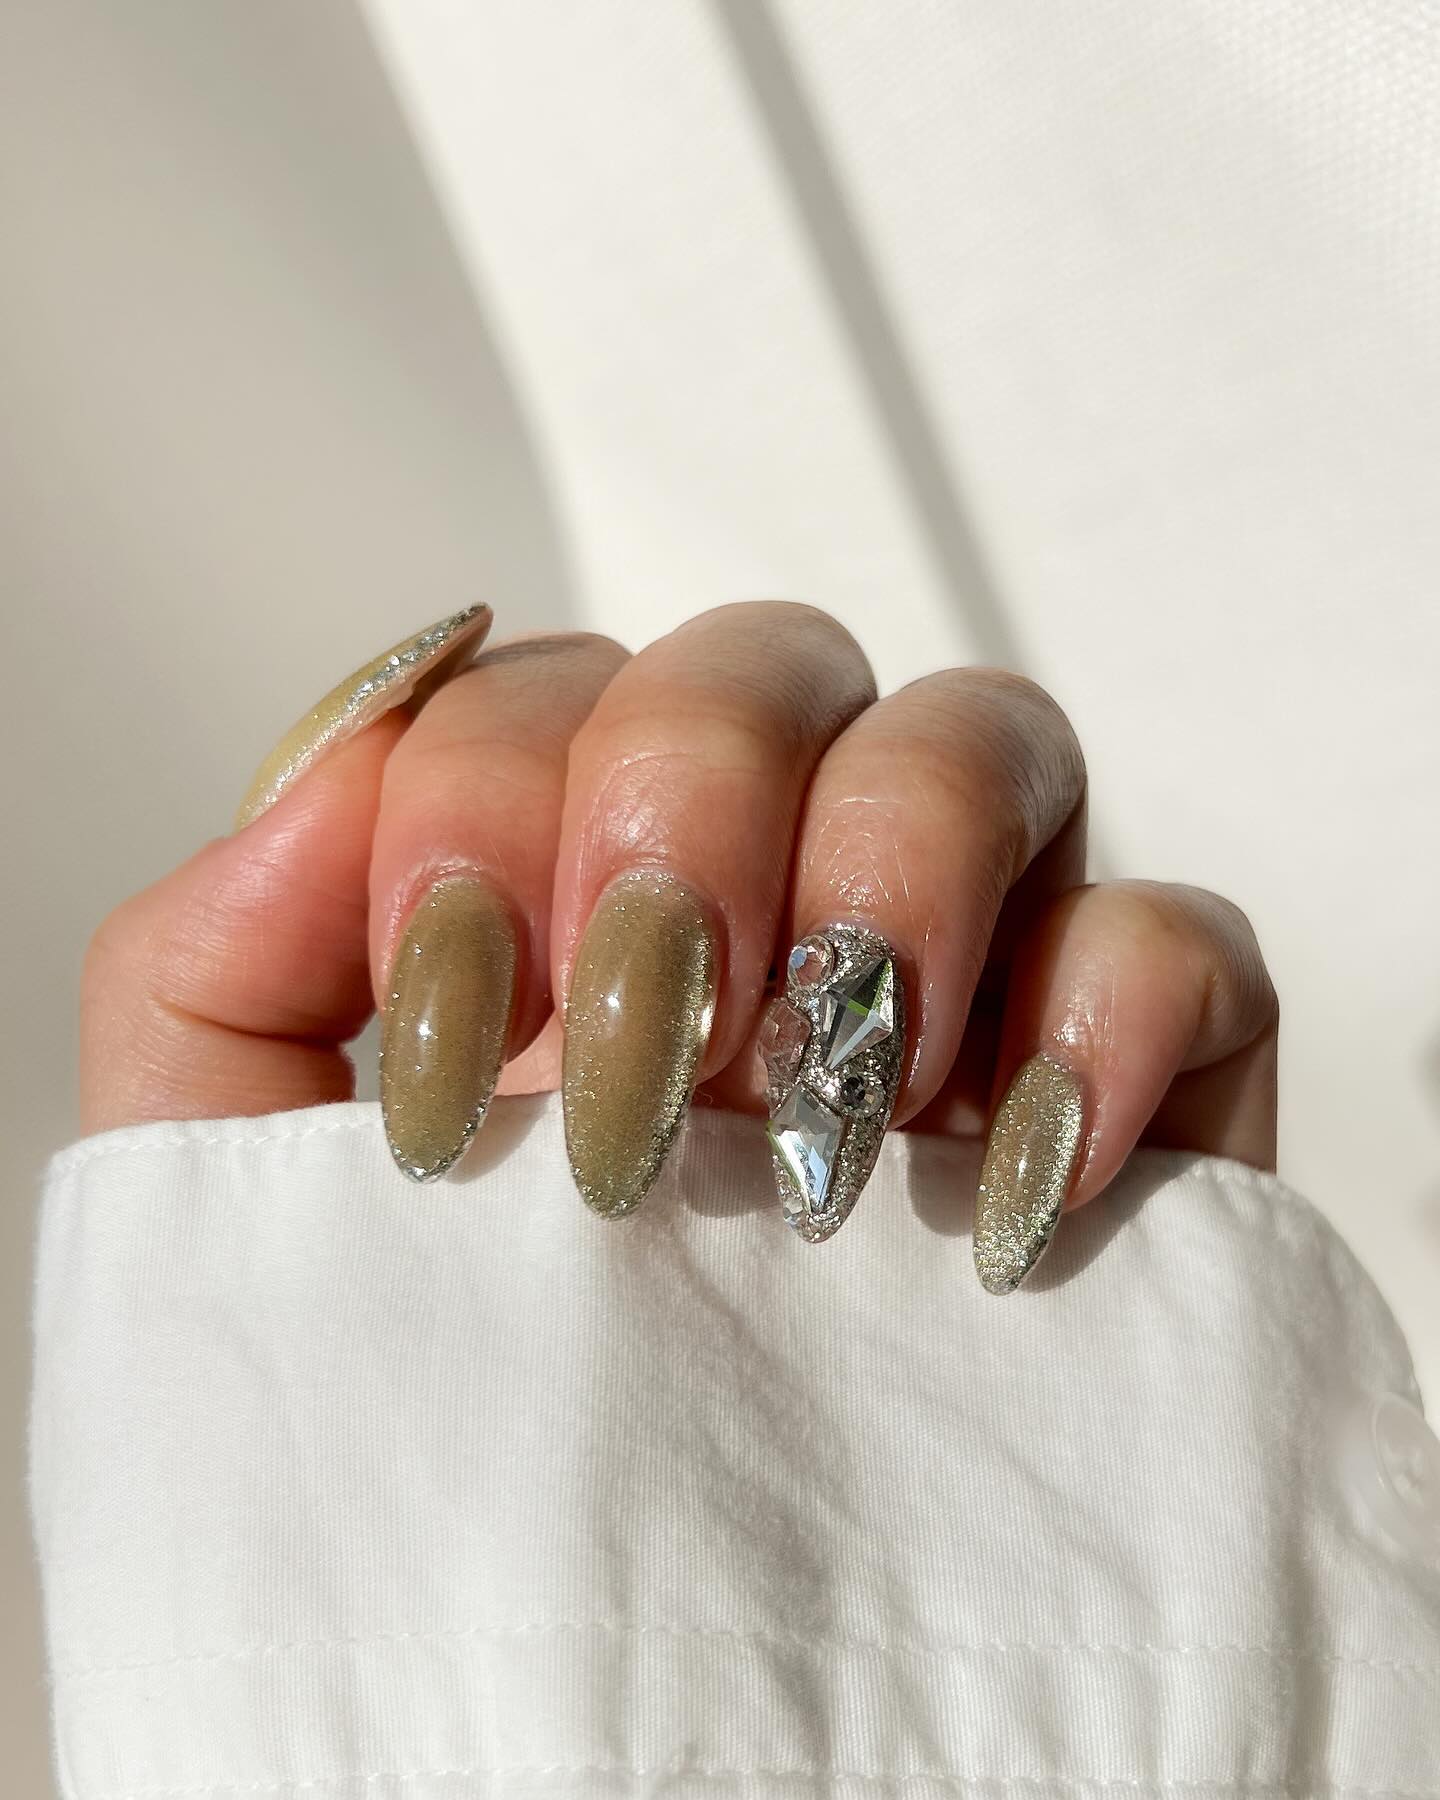 100+ Short Nail Designs You’ll Want To Try This Year images 95